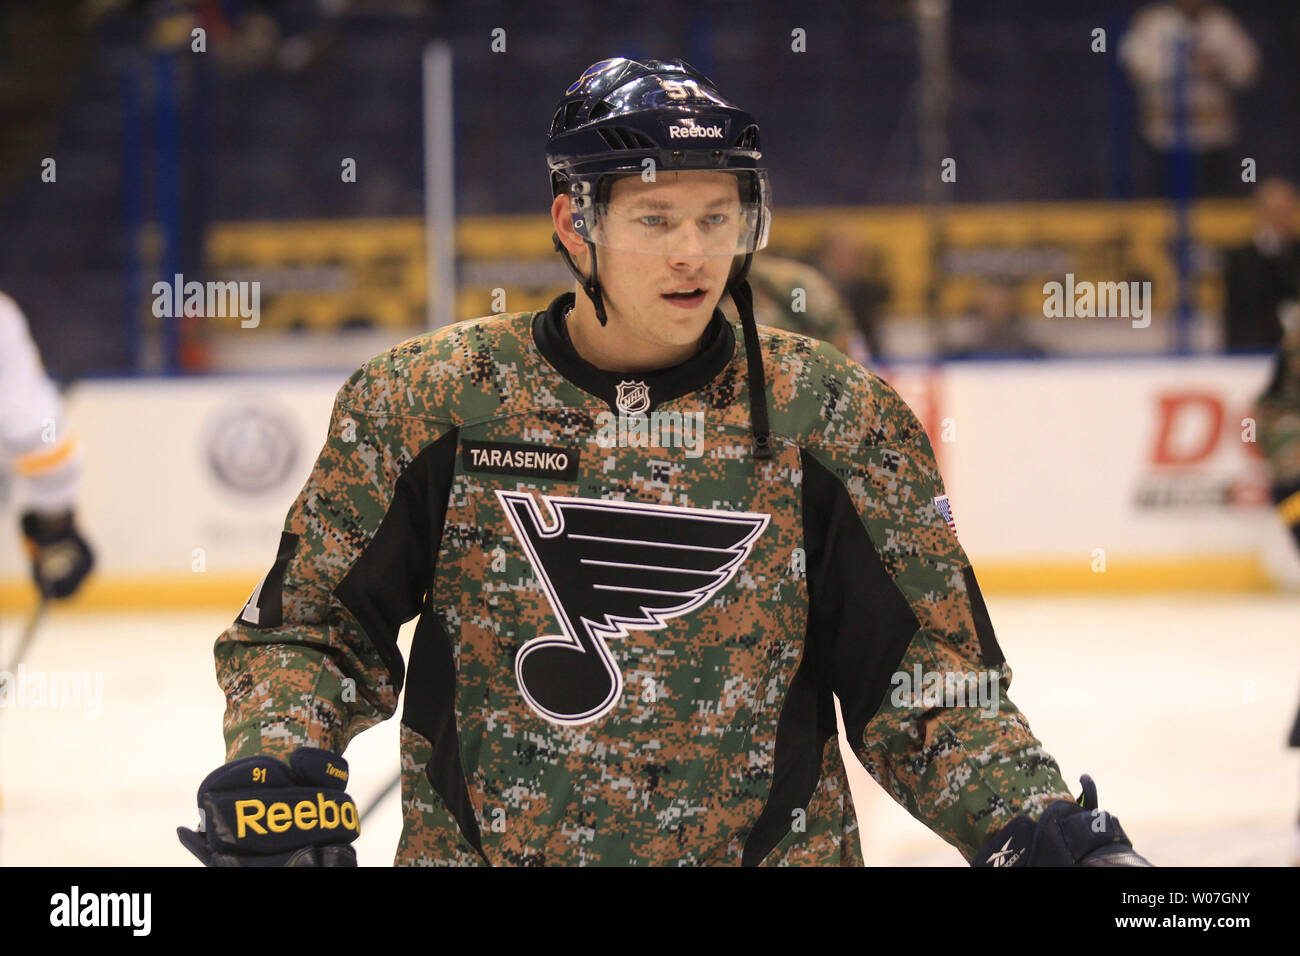 St. Louis Blues Vladimir Tarasenko of Russia, wears a camouflage jersey  during pre game skate before a game against the Buffalo Sabres at the  Scottrade Center in St. Louis on November 11,